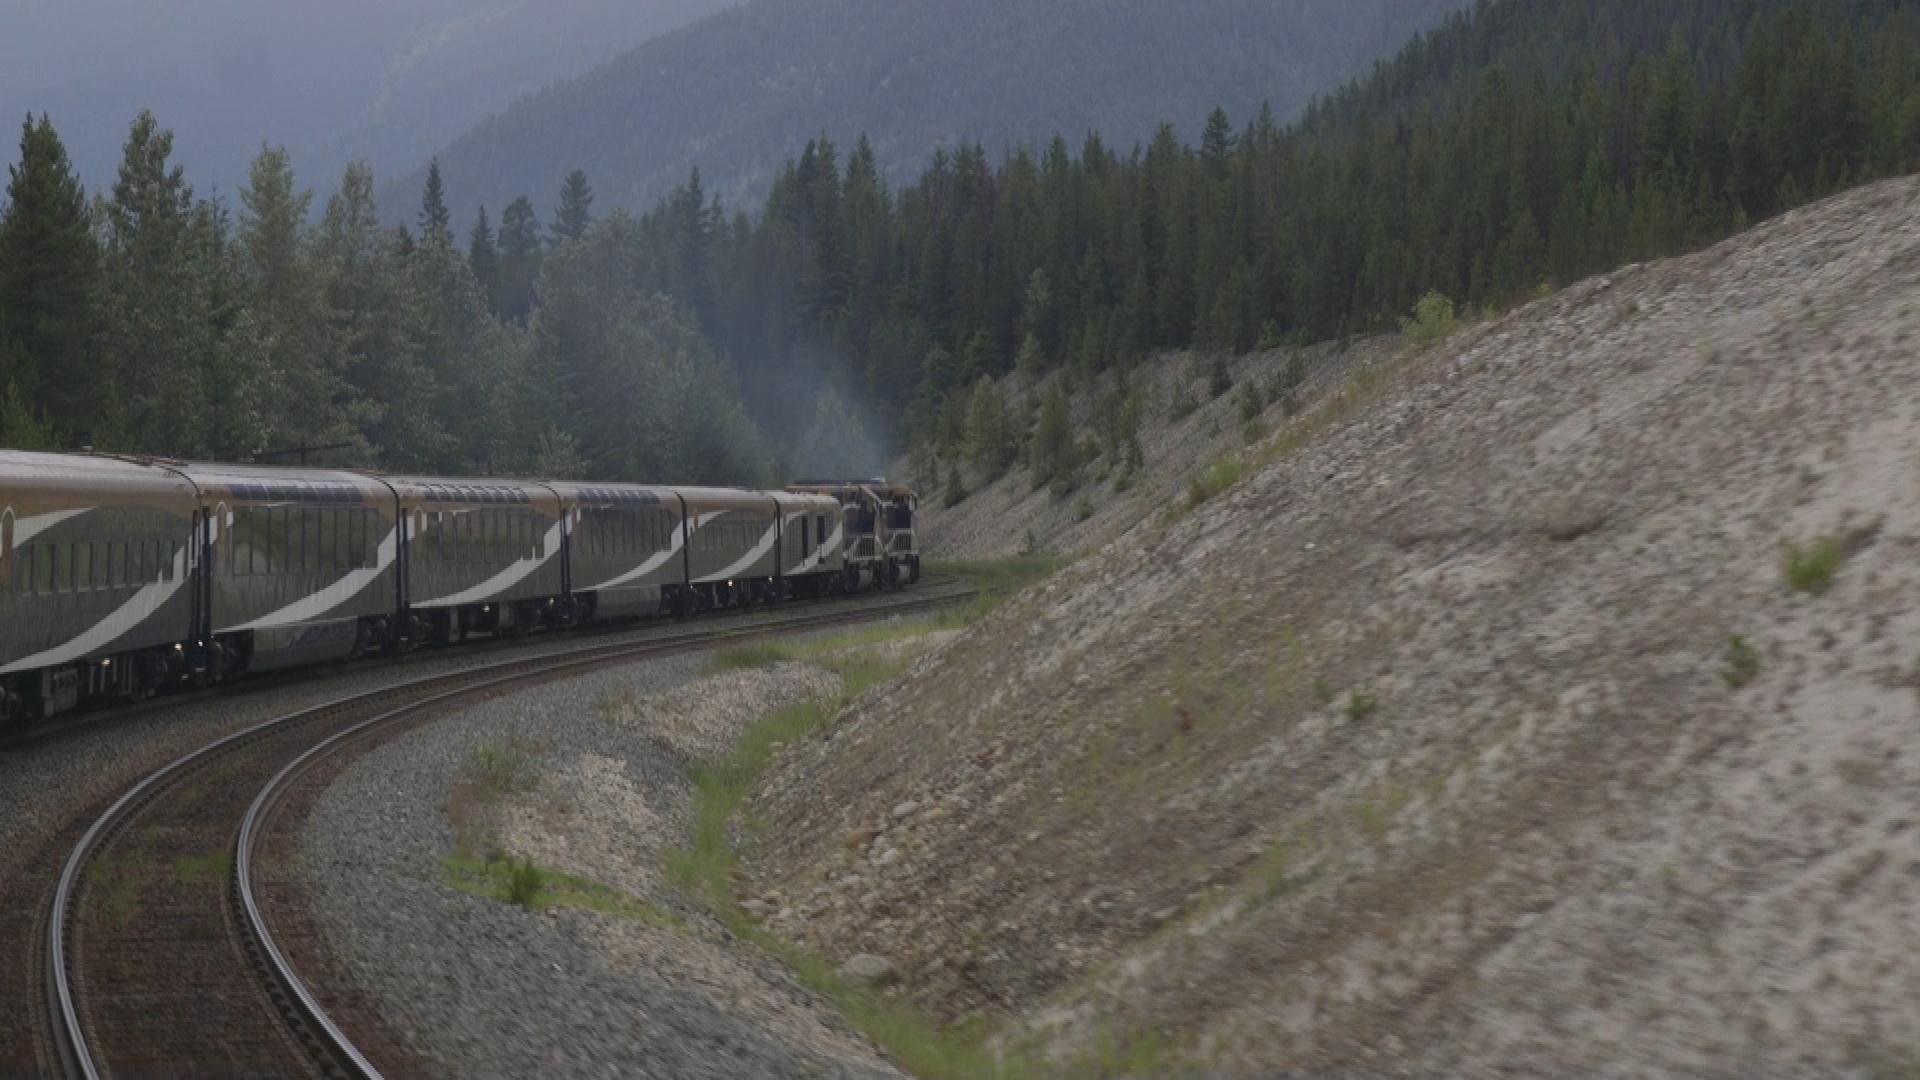 The Rocky Mountaineer makes its way to Kamloops.